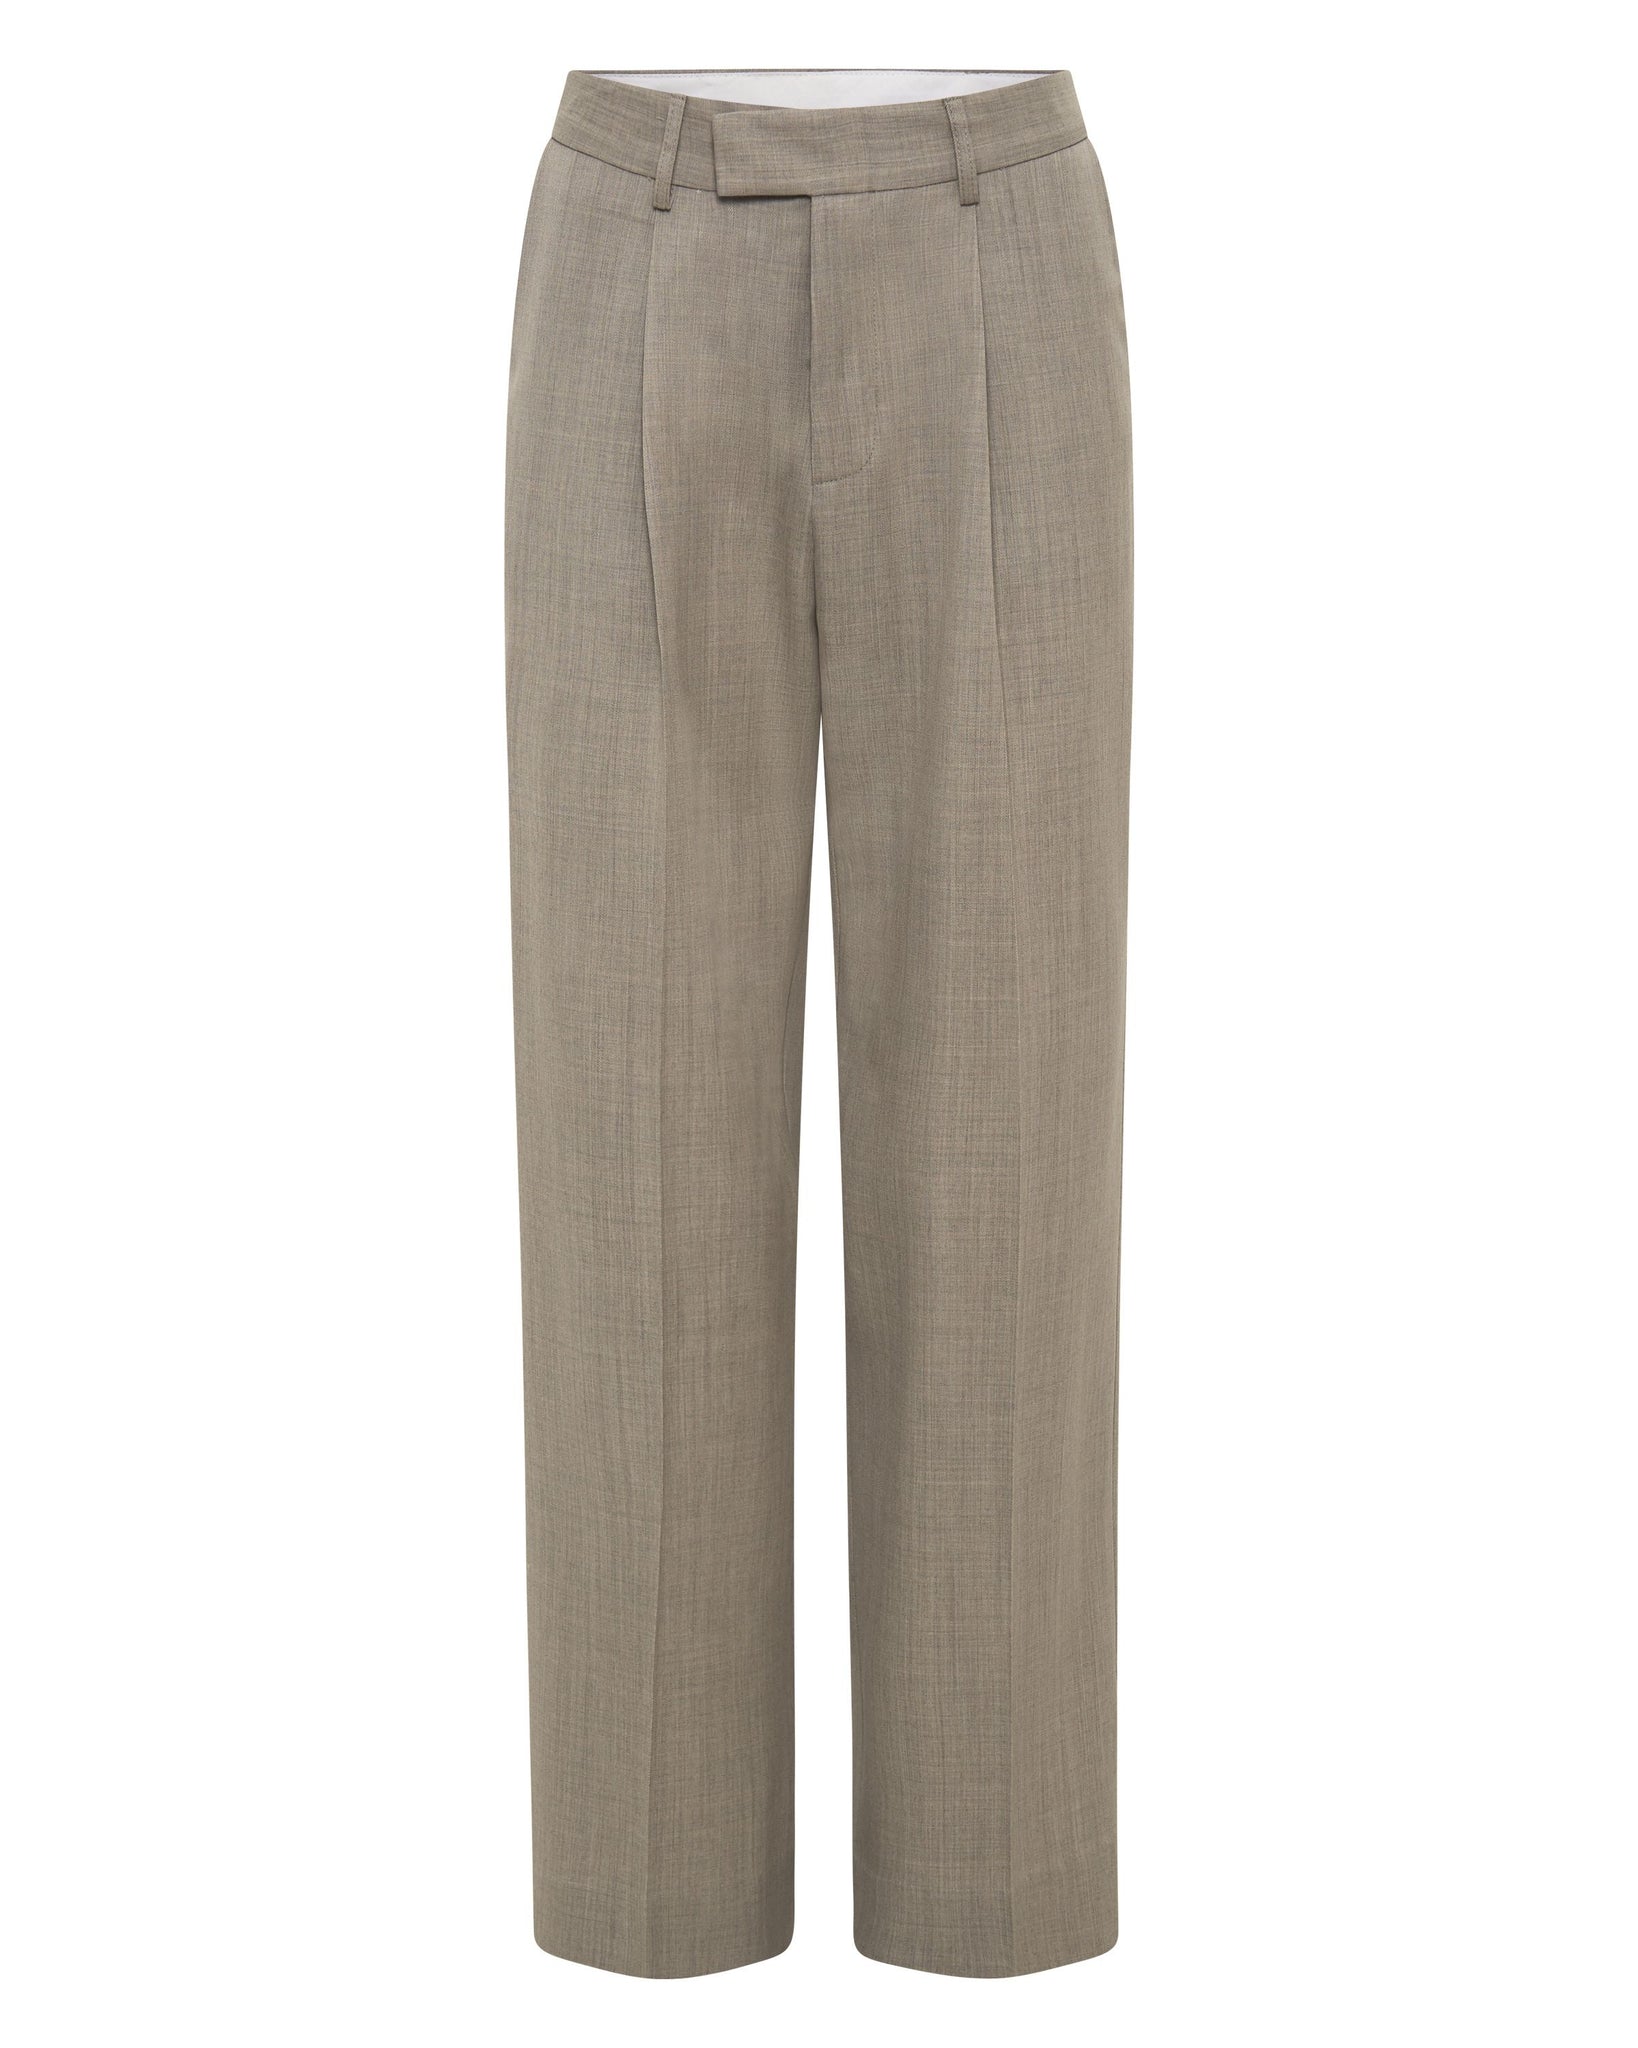 Relaxed Tailored Pleat Trouser: Oat